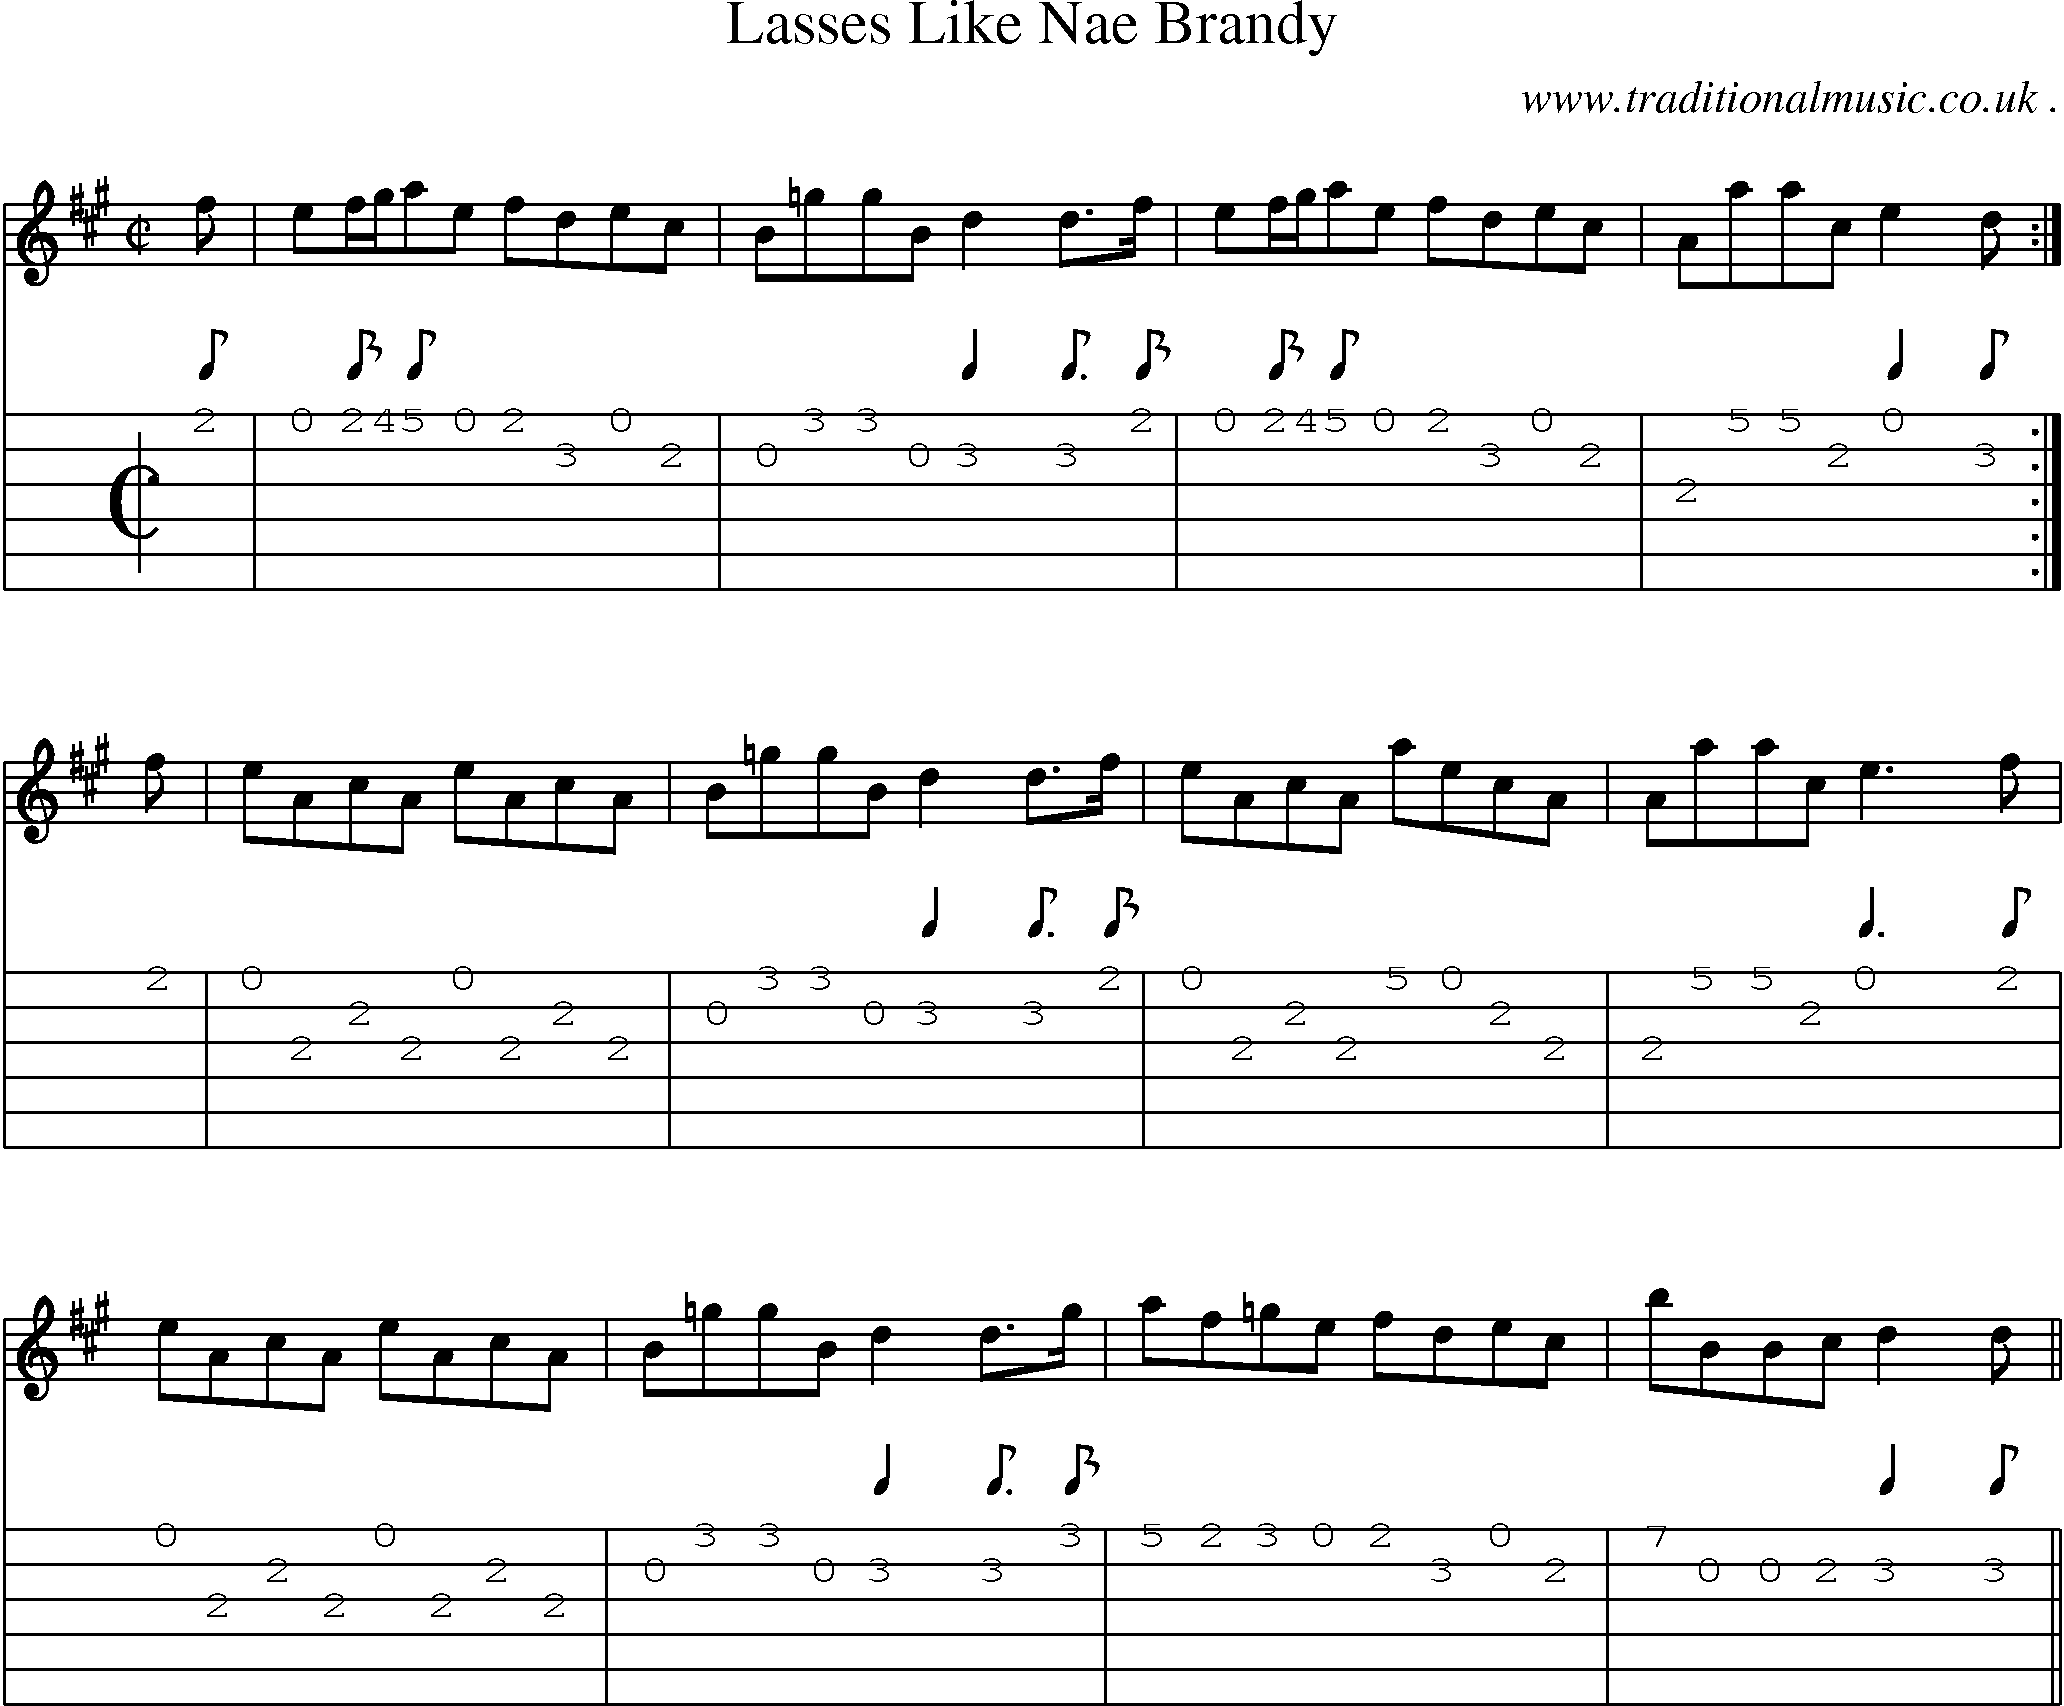 Sheet-music  score, Chords and Guitar Tabs for Lasses Like Nae Brandy